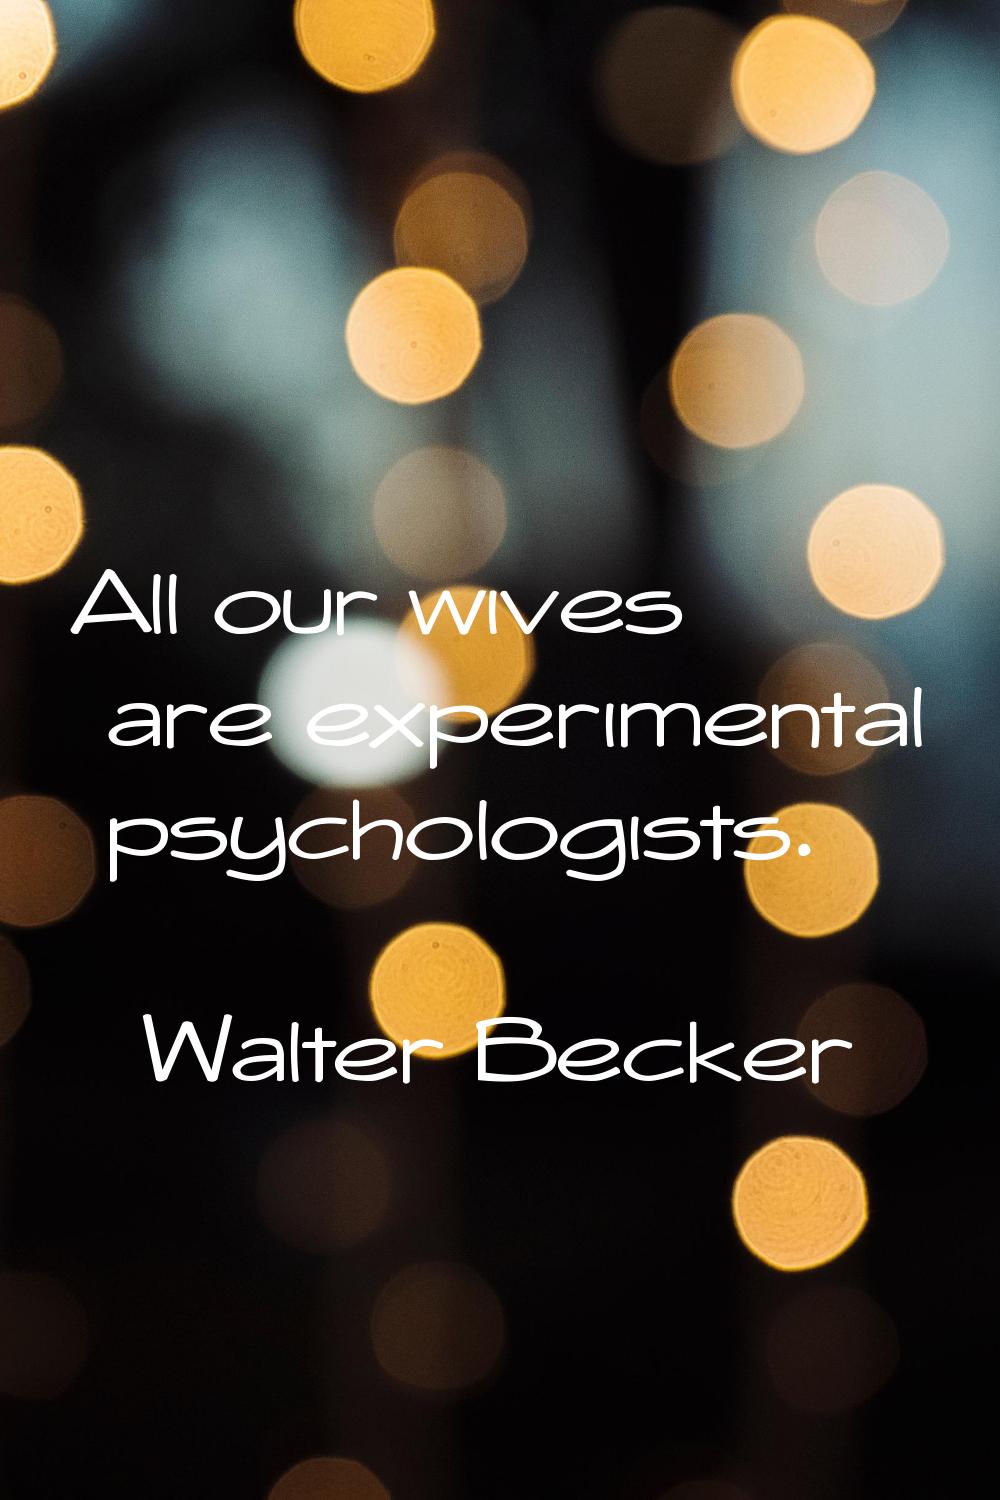 All our wives are experimental psychologists.